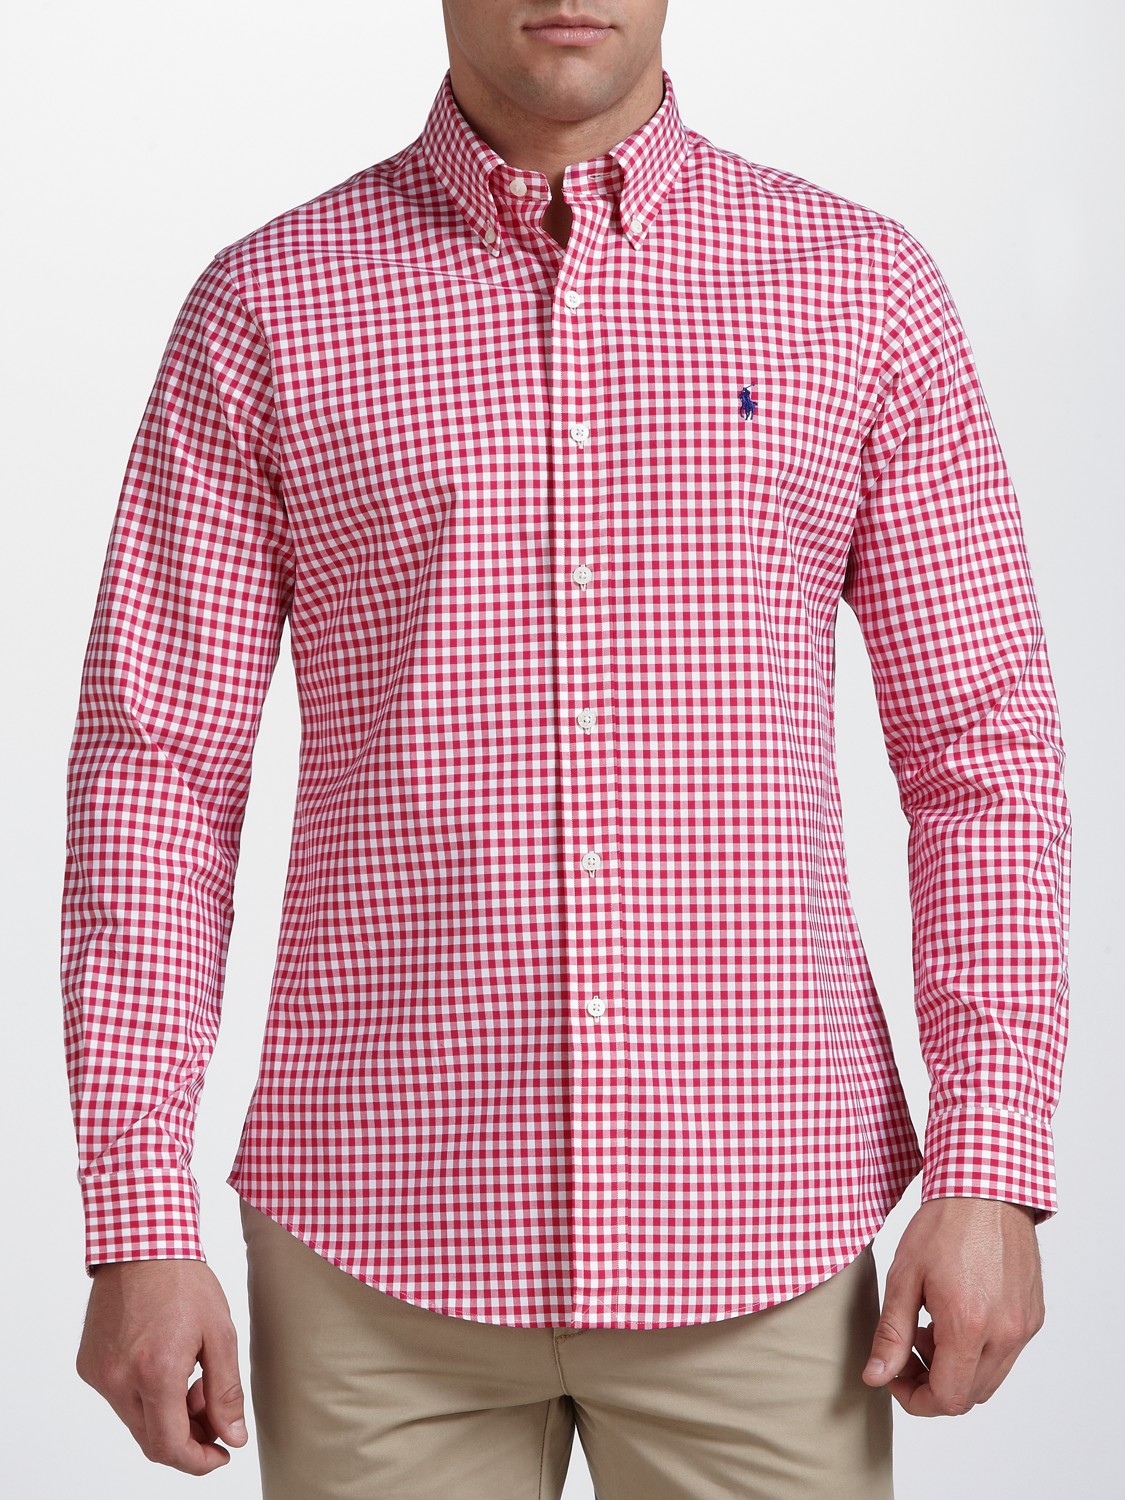 Polo Ralph Lauren Casual shirts and button-up shirts for Men